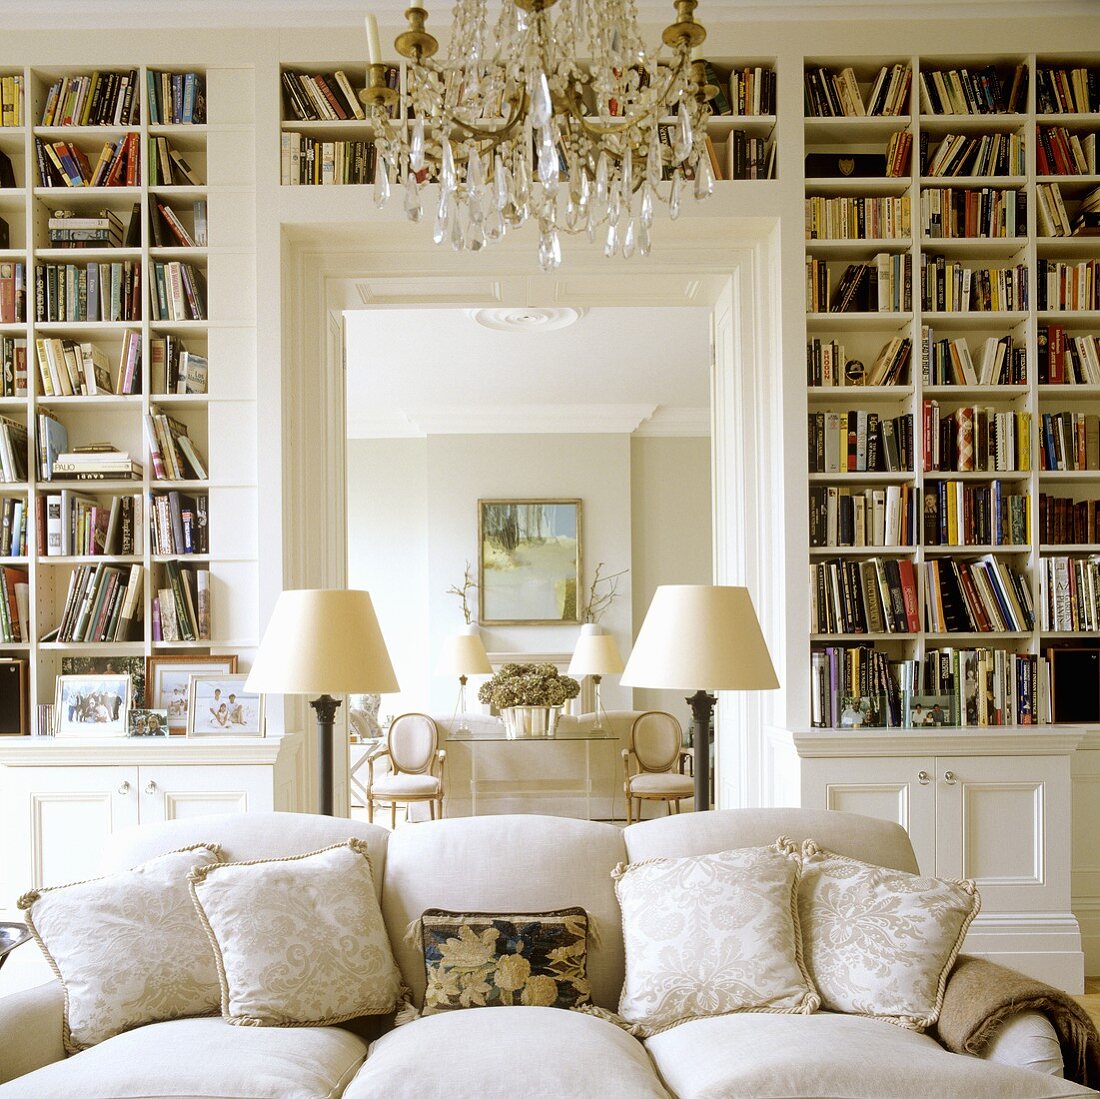 A light upholstered sofa in front of a built-in bookshelf with a view into a living room